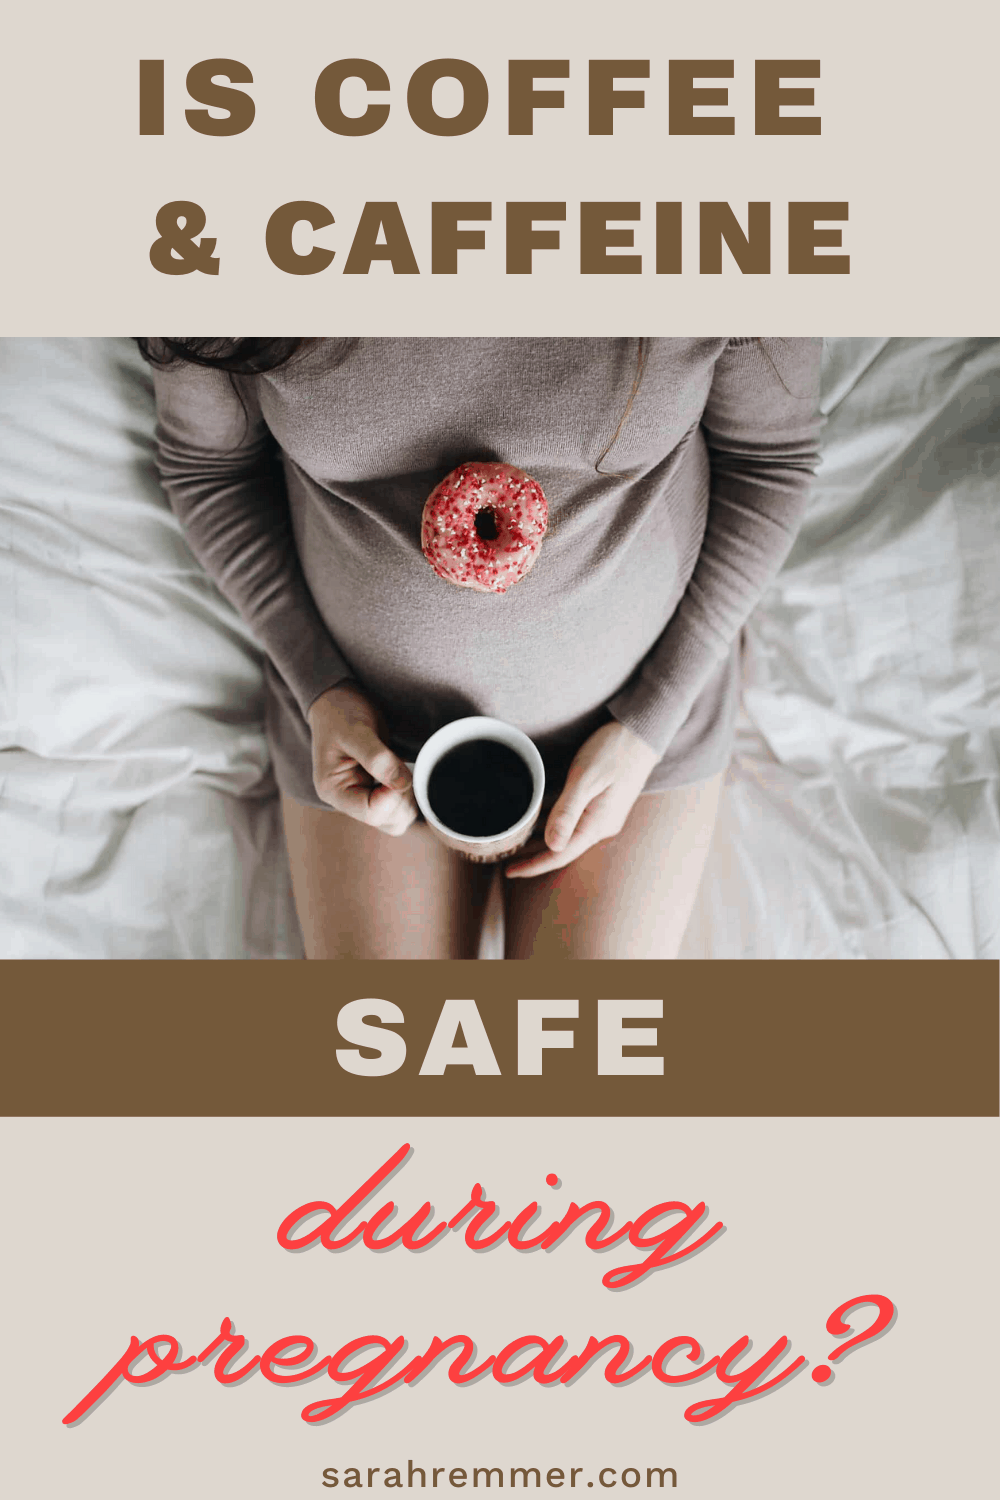 is caffeine and coffee safe during pregnancy